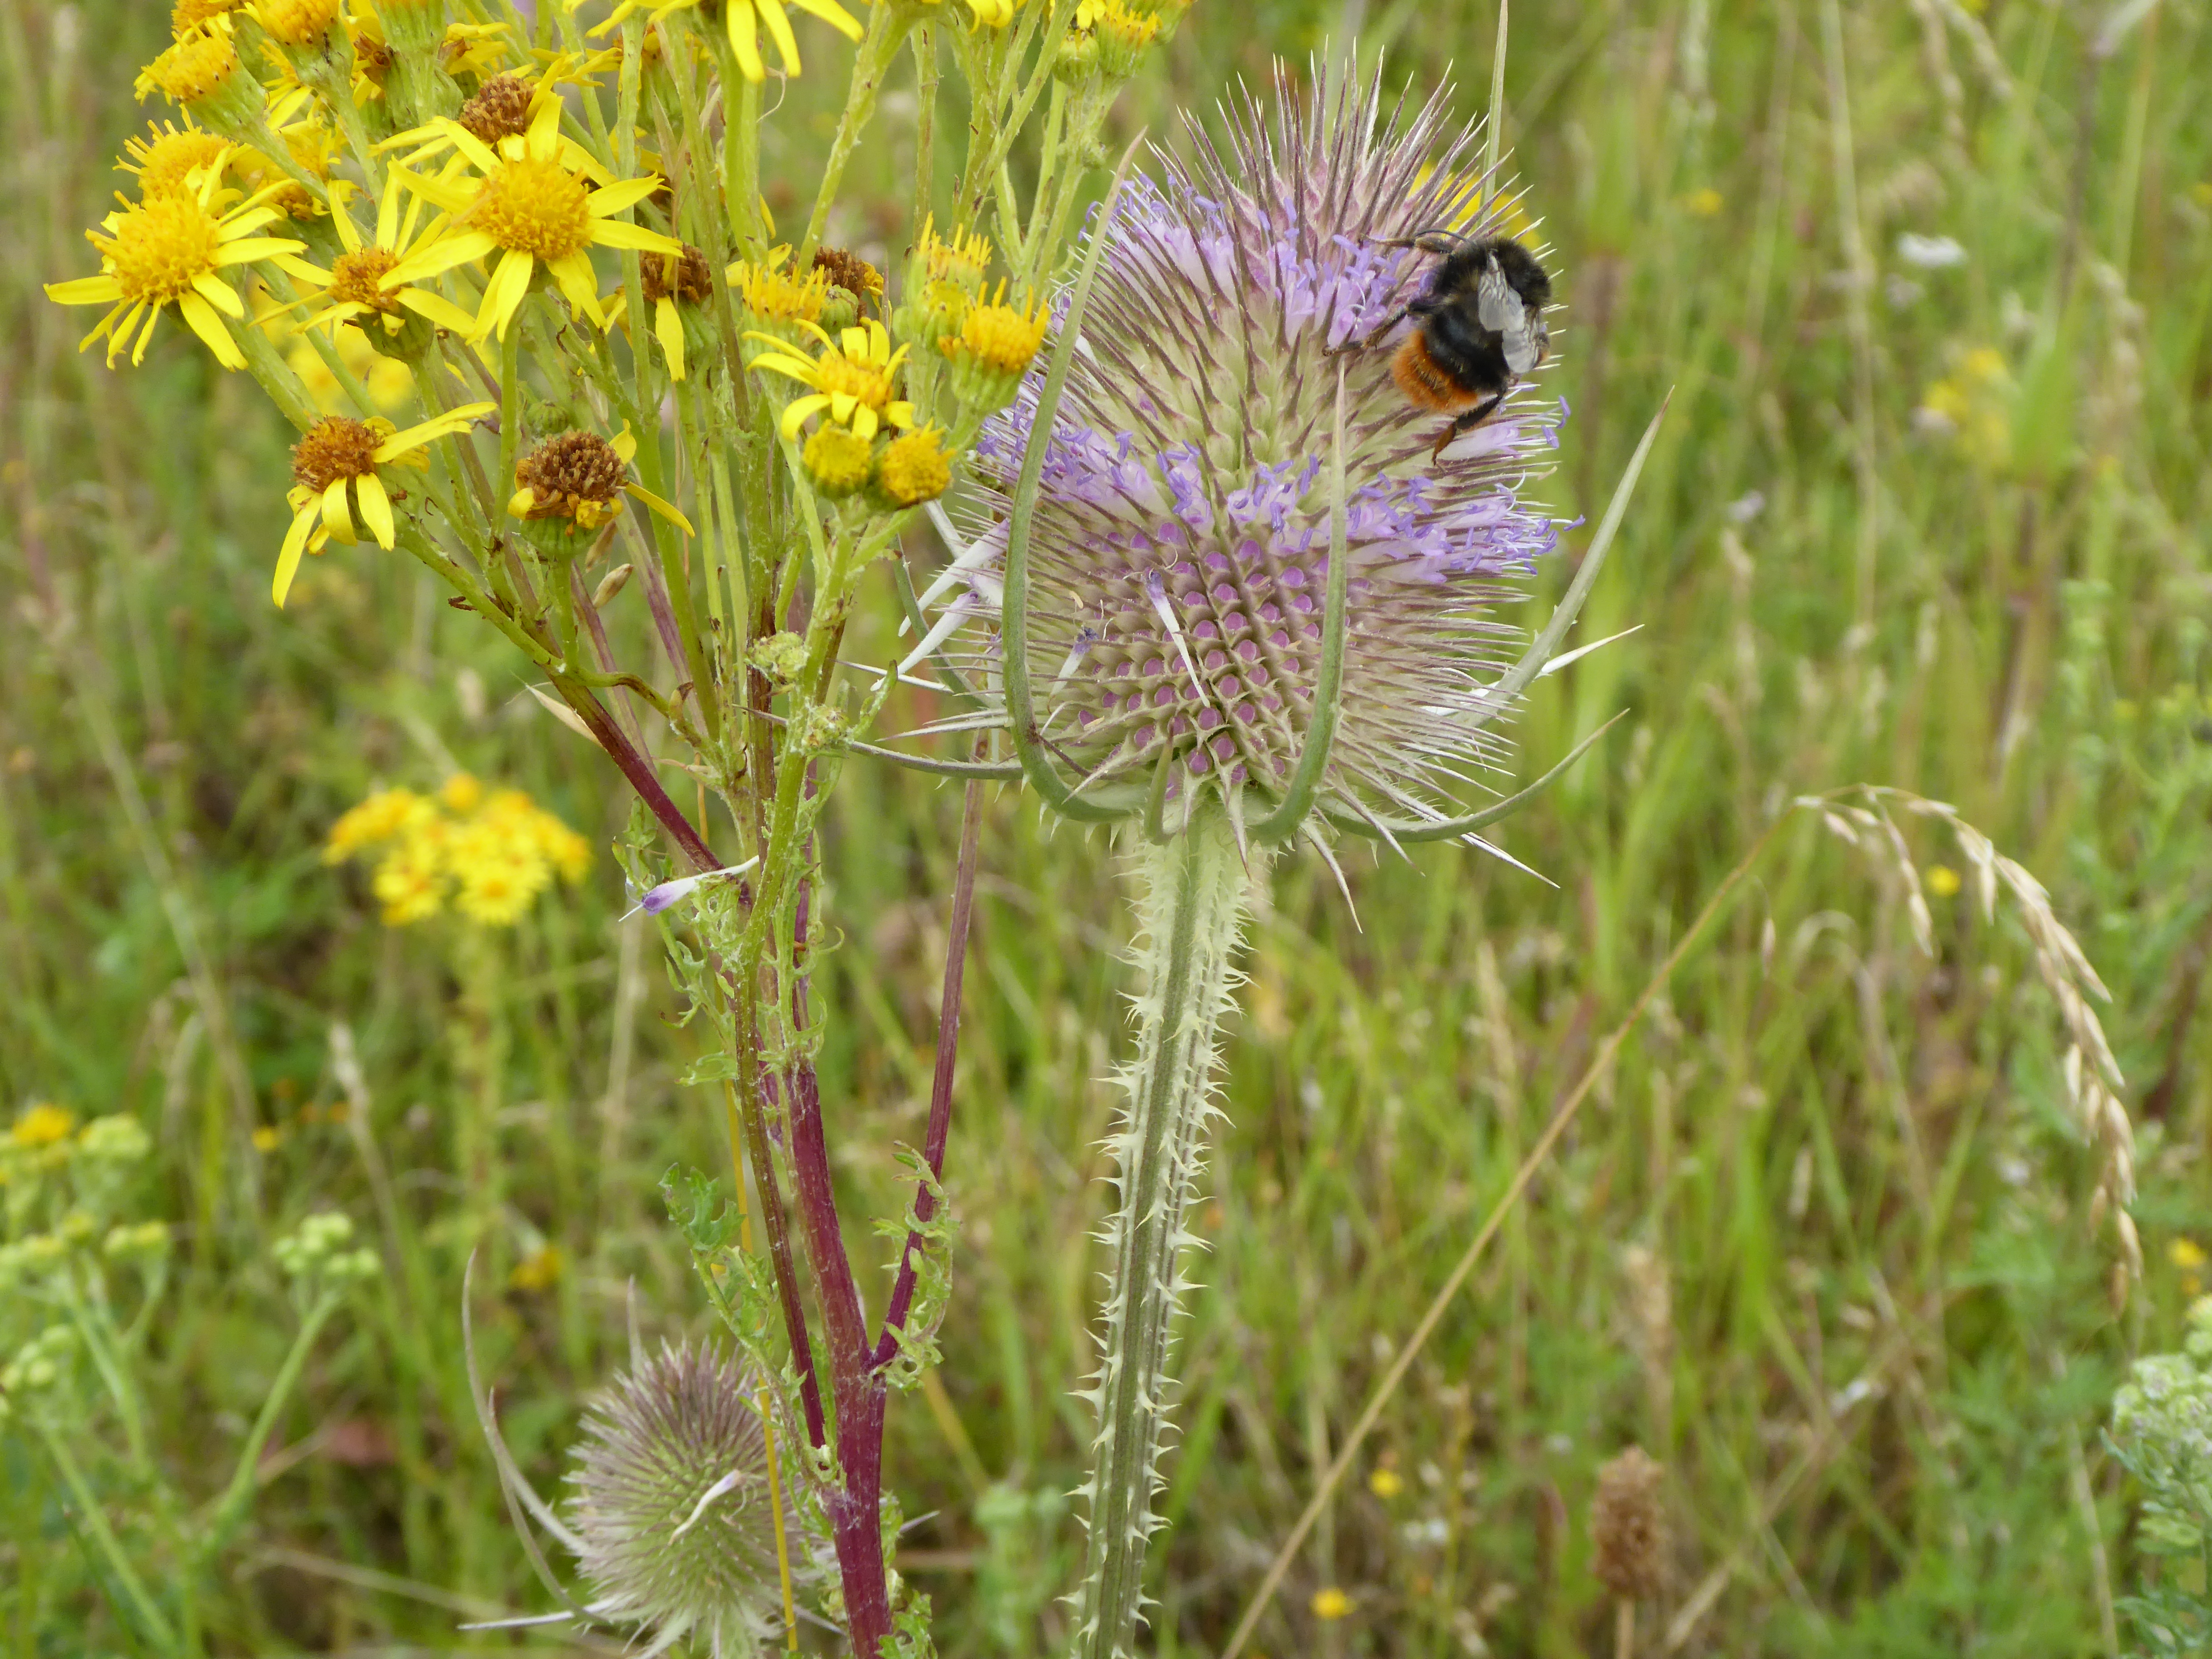 Teasel with red-tailed bumblebee